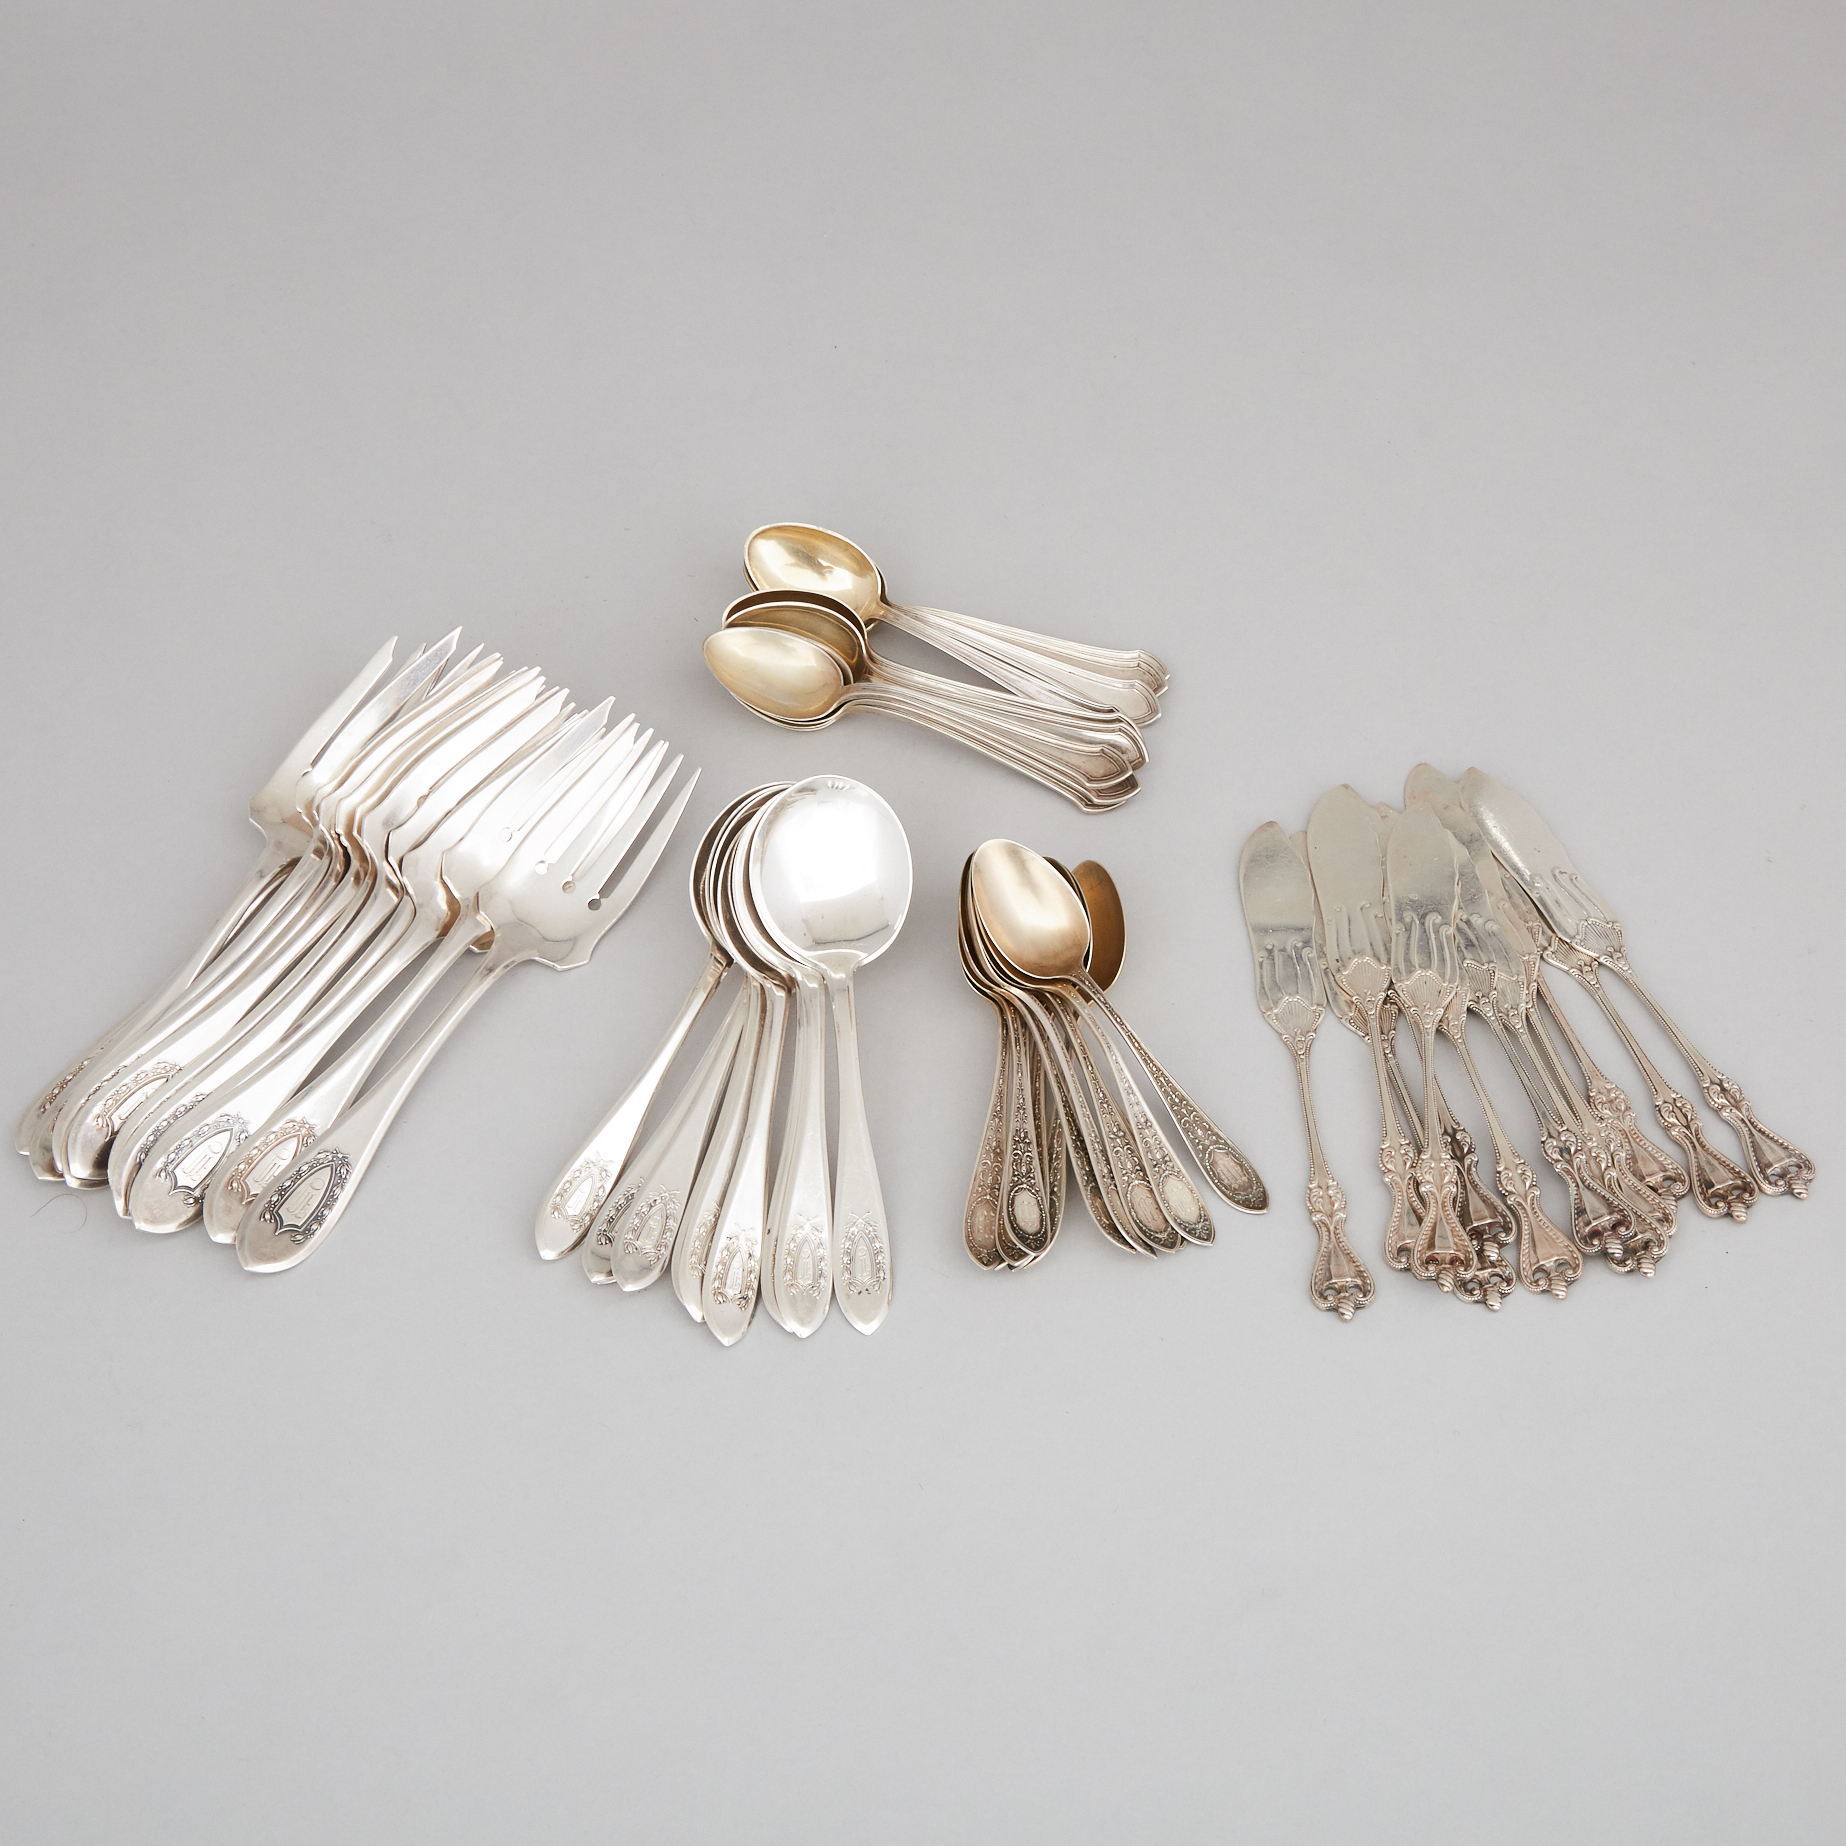 Group of American Silver Flatware, early 20th century